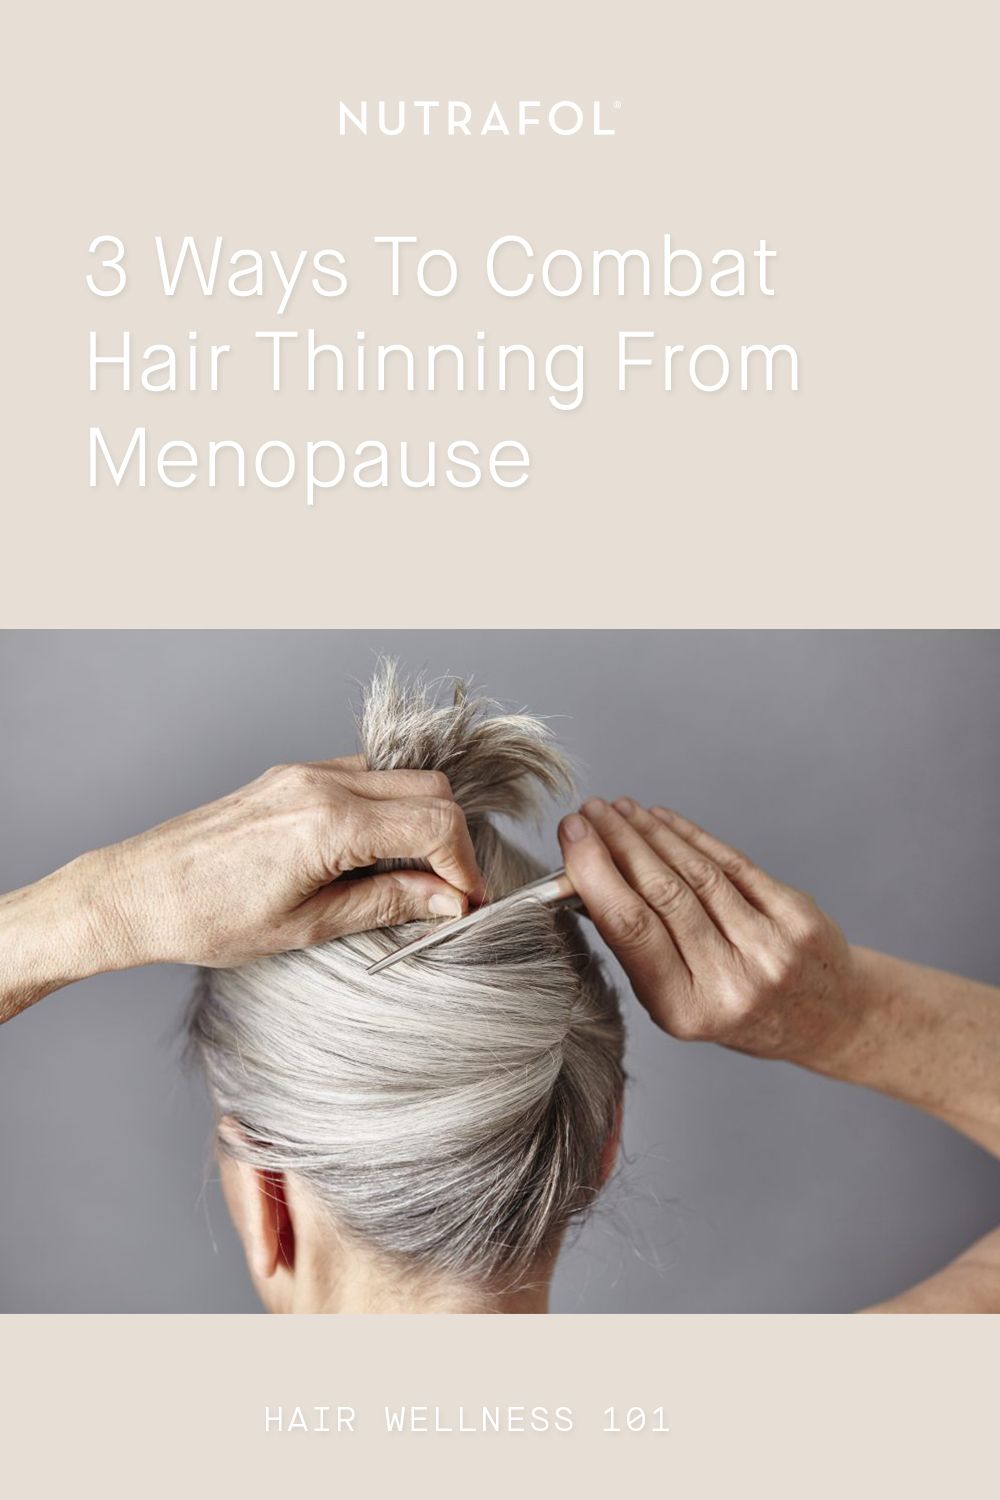 How To Reverse Thinning Hair After Menopause